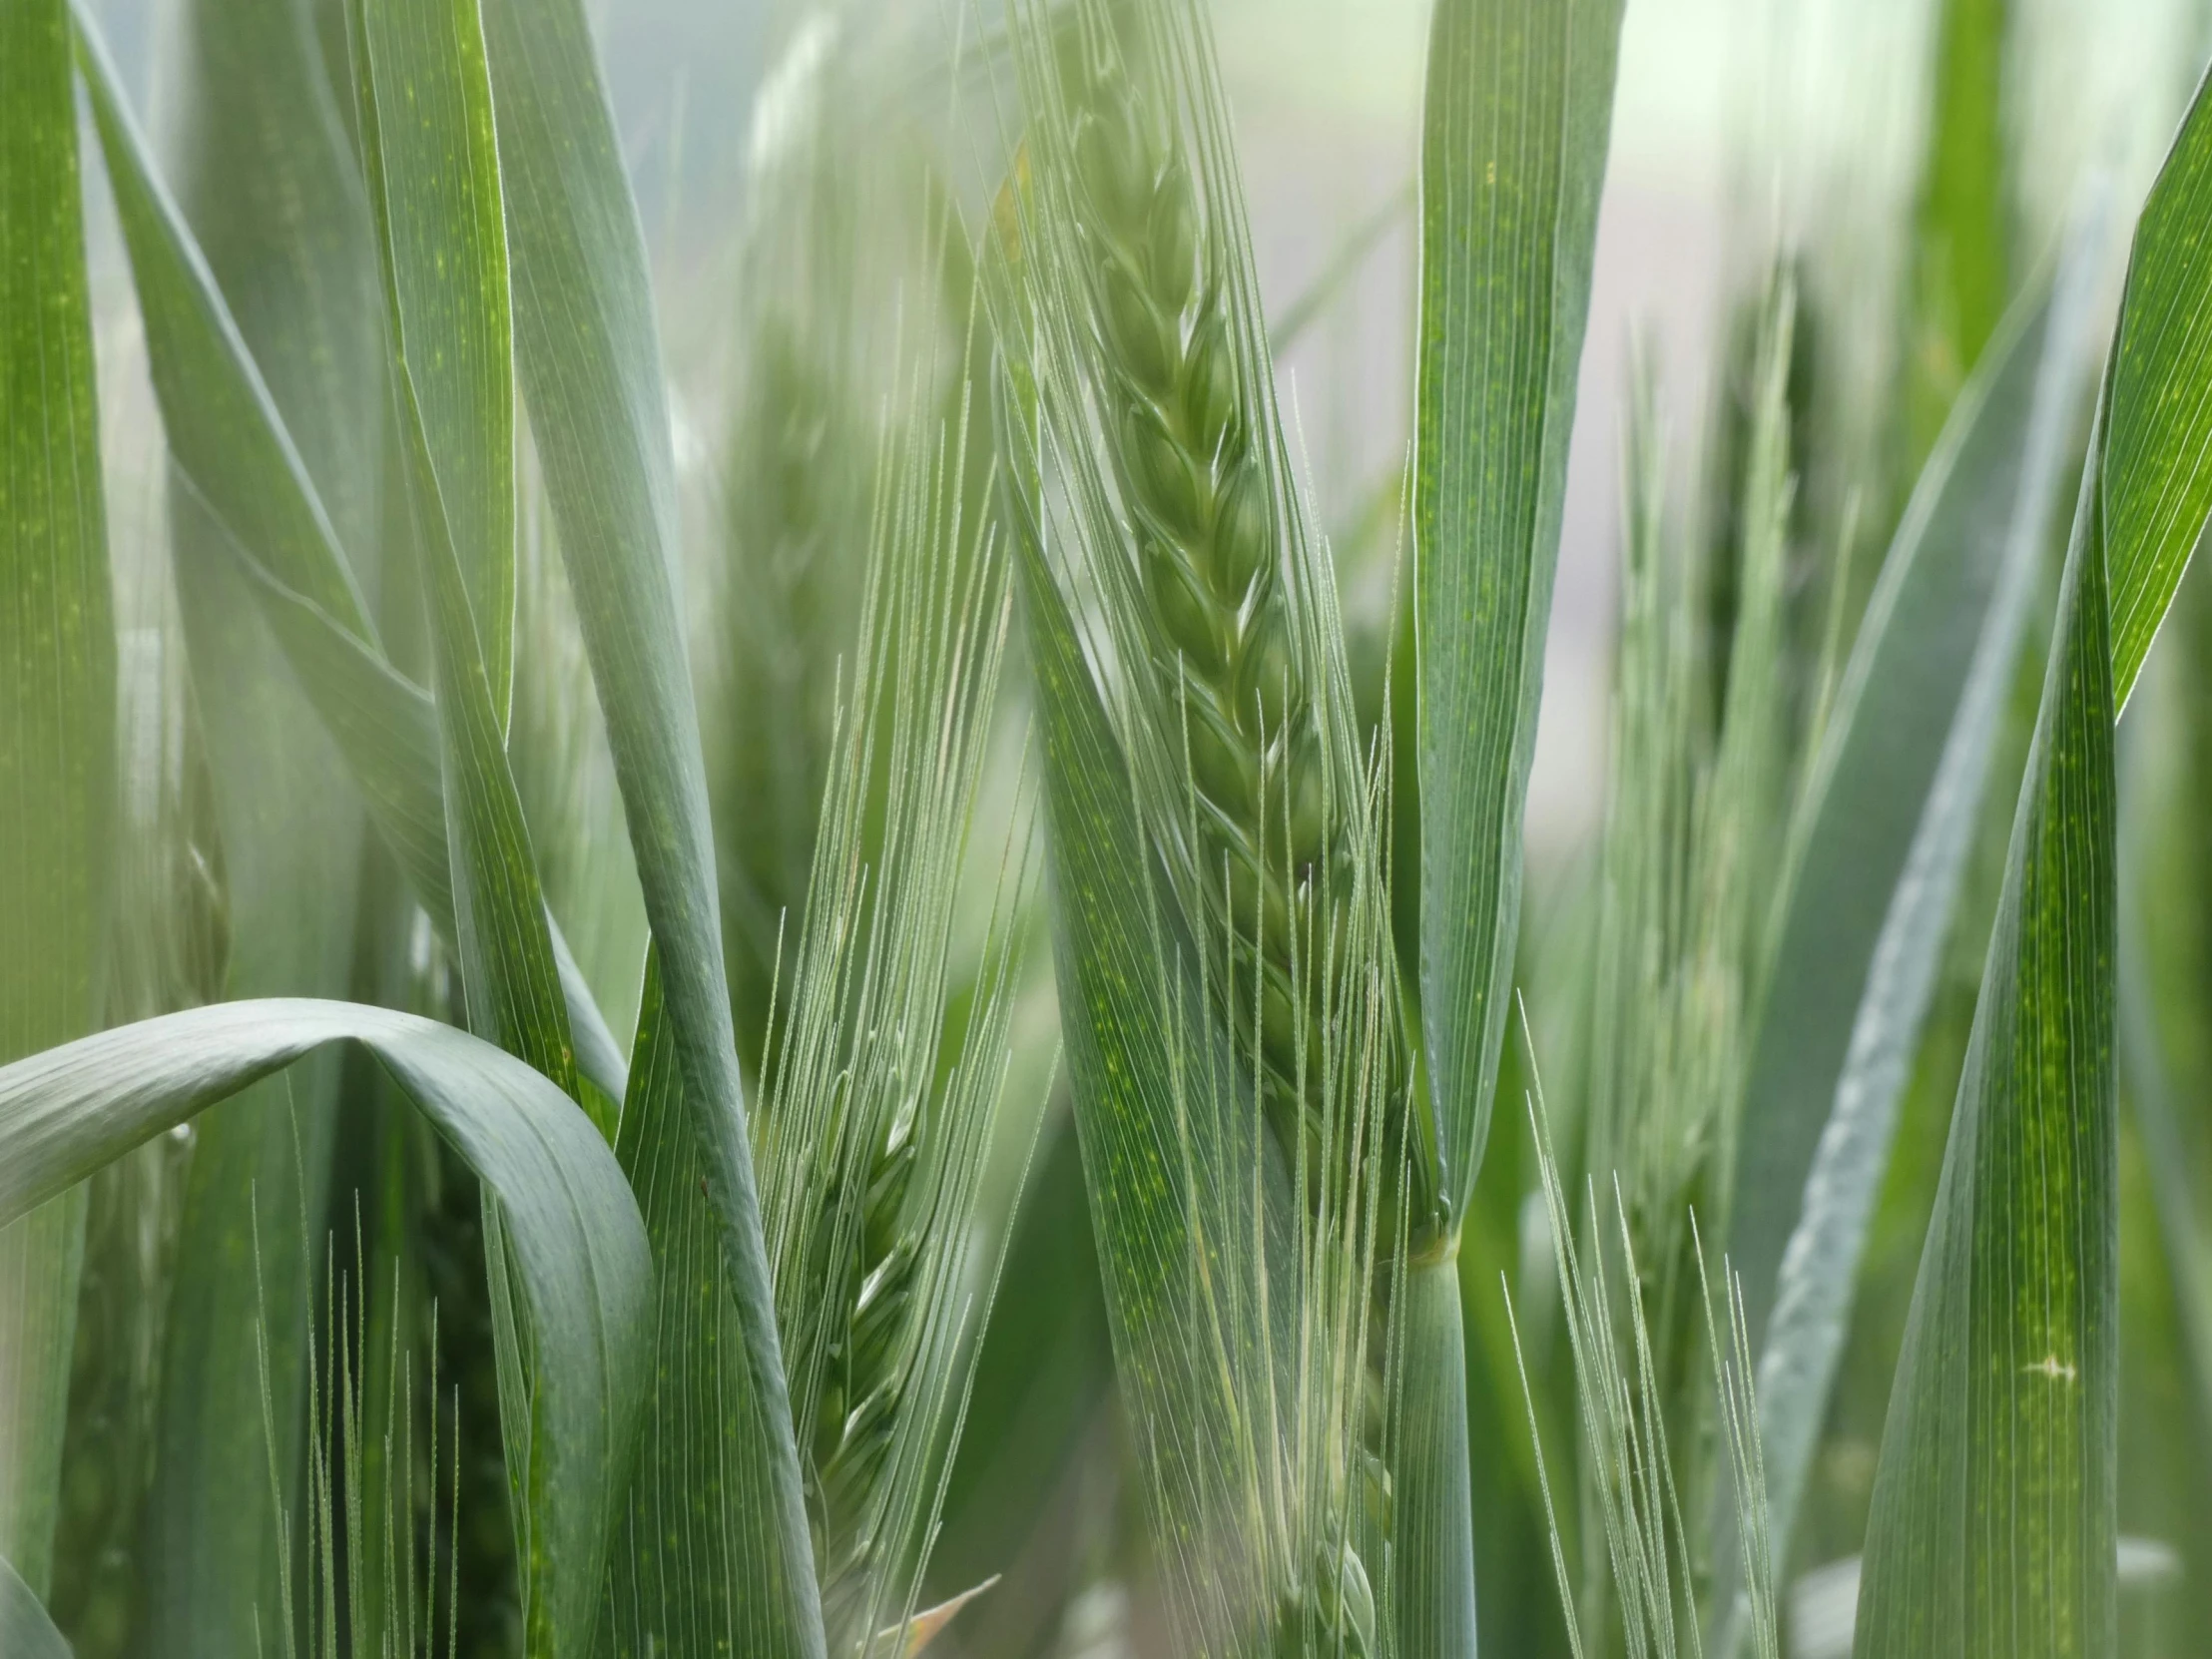 a close up view of green wheat stalks